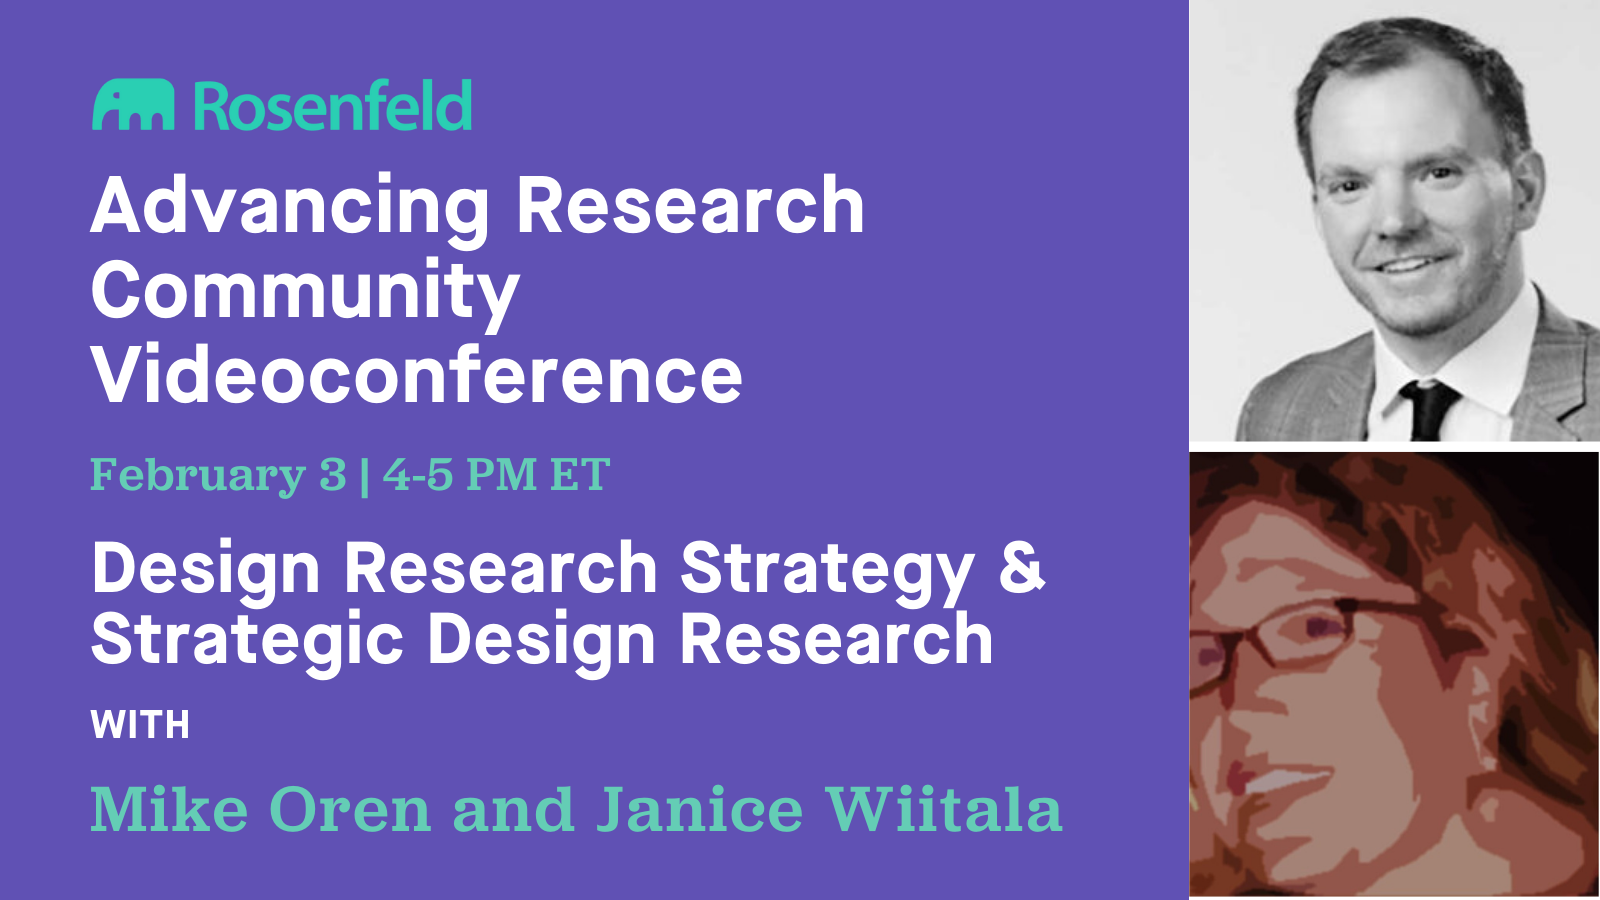 Advancing Research Community Videoconference, Design Research Strategy & Strategic Design Research with Mike Oren and Janice Wiitala